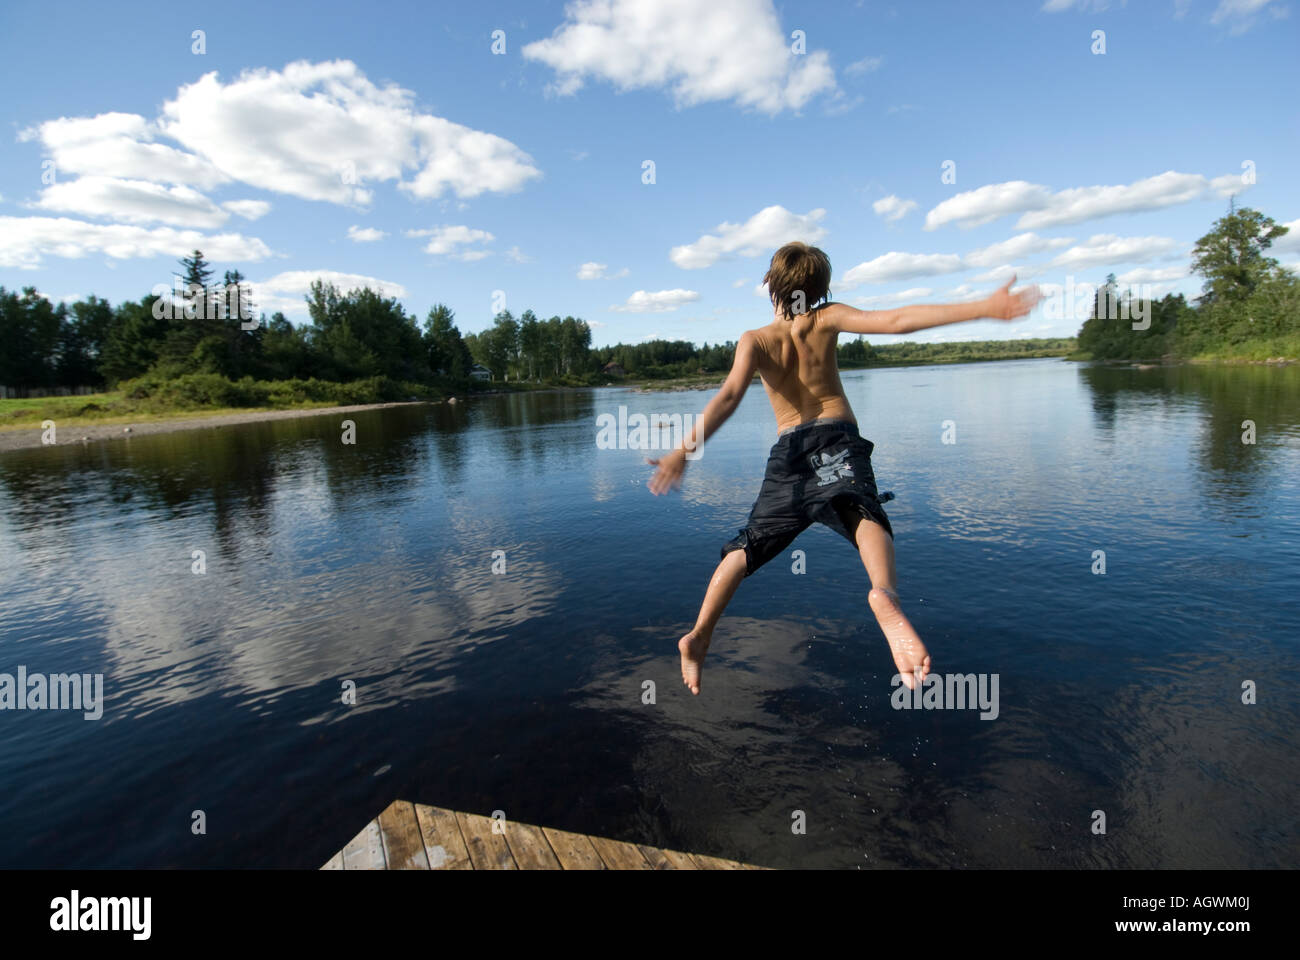 jumping in the river Stock Photo